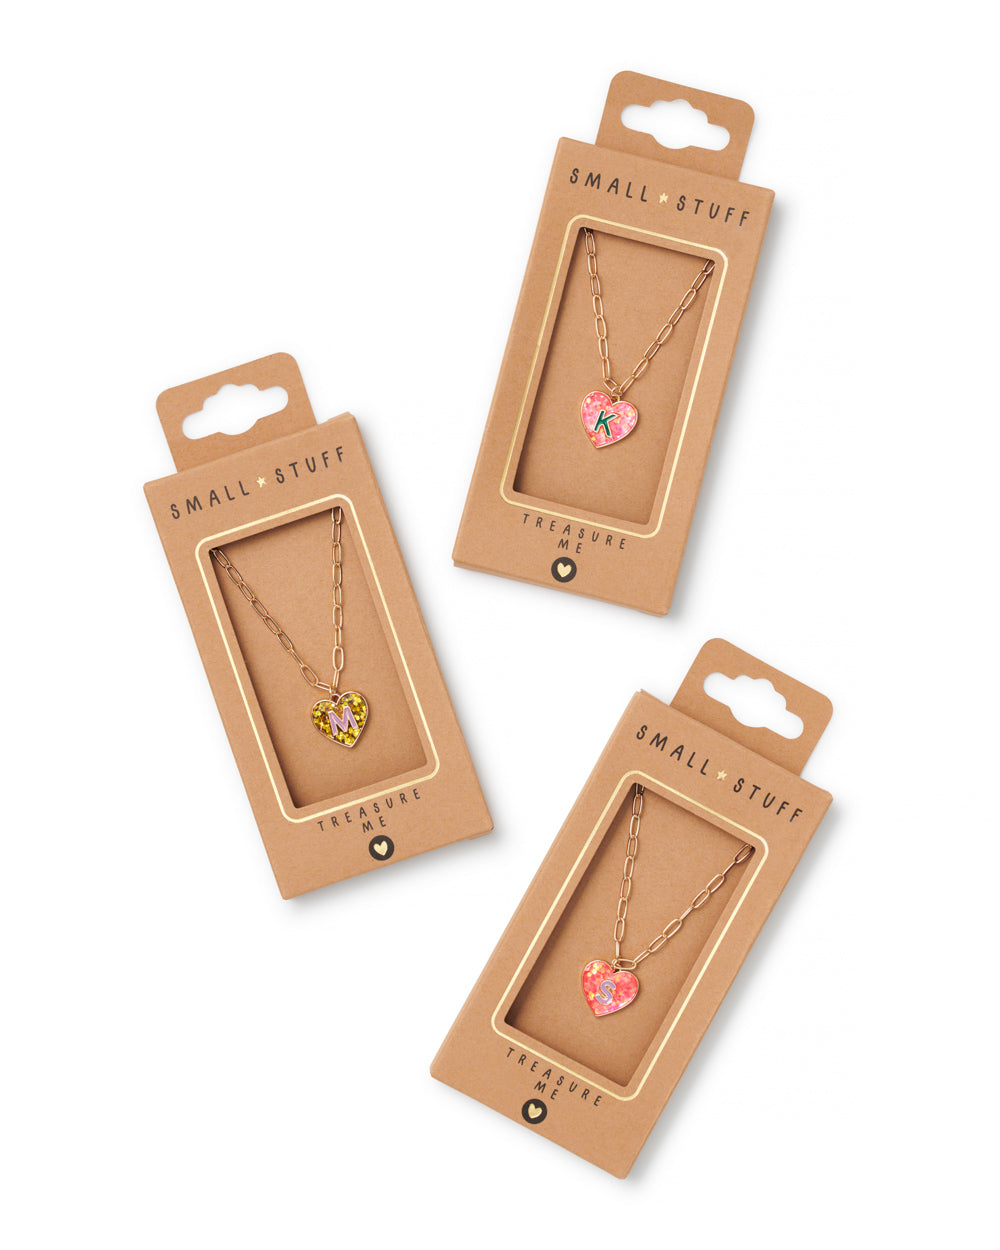 Initial personalised heart glitter girls necklace with gold loop chain